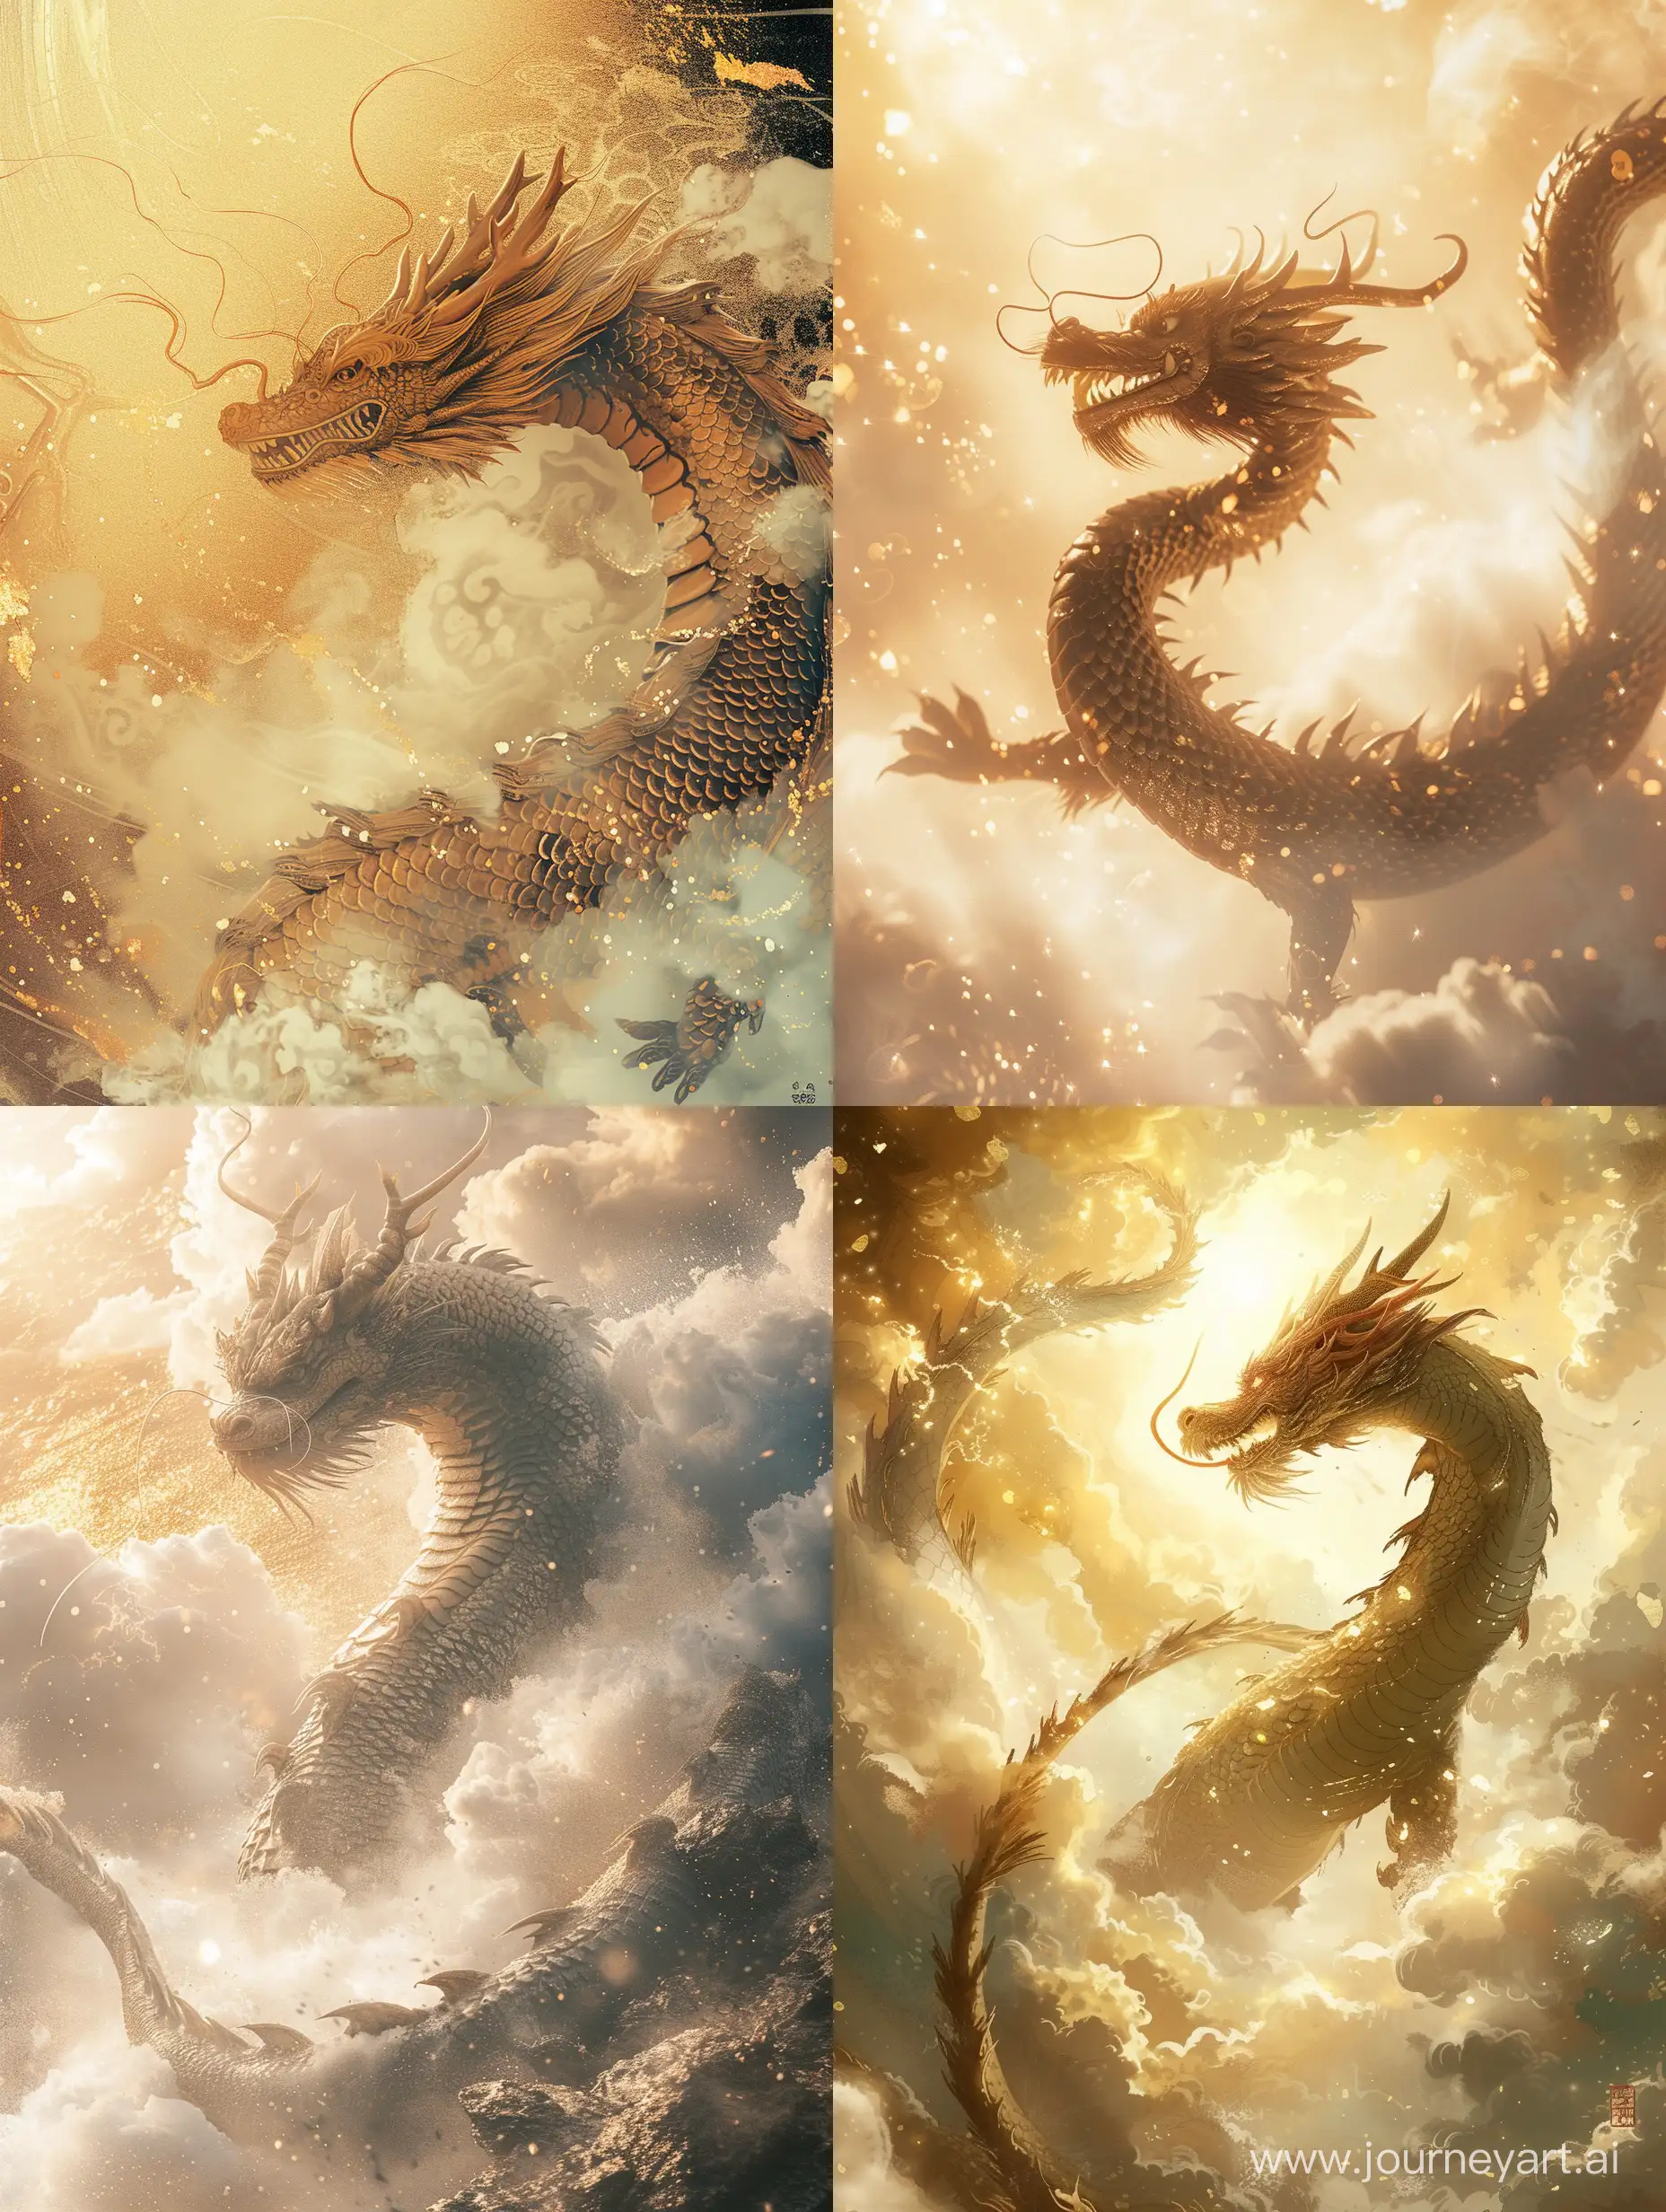 Chinese dragon, a giant dragon cutely walks out from the white gold clouds, the dragon and the background are strong, extreme details, backlighting, dream scene